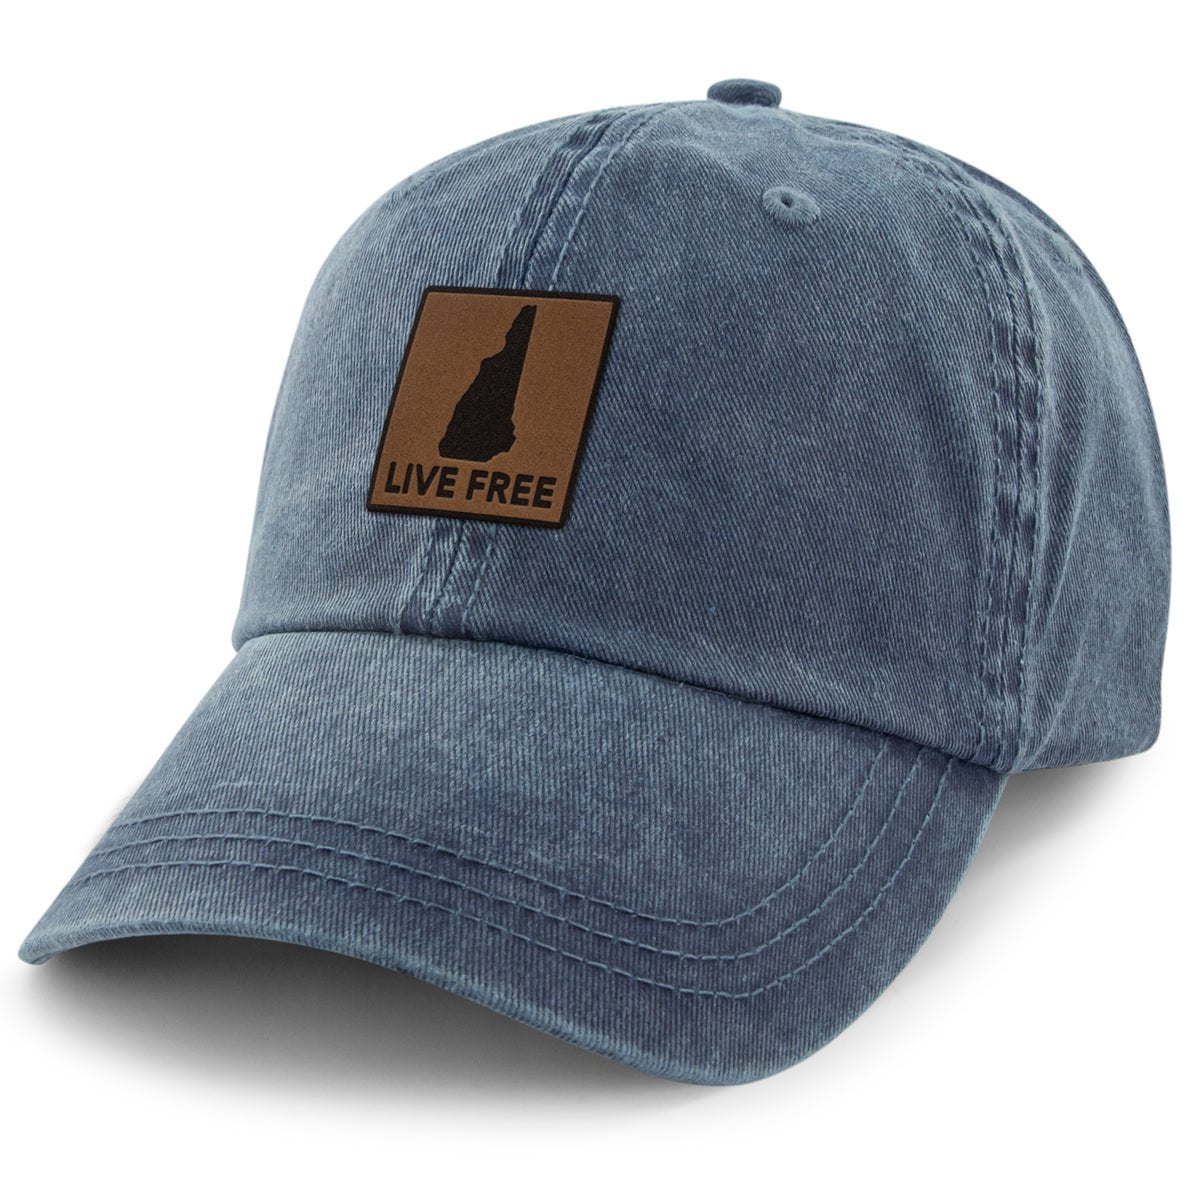 Live Free New Hampshire Leather Patch Washed Dad Hat - Chowdaheadz